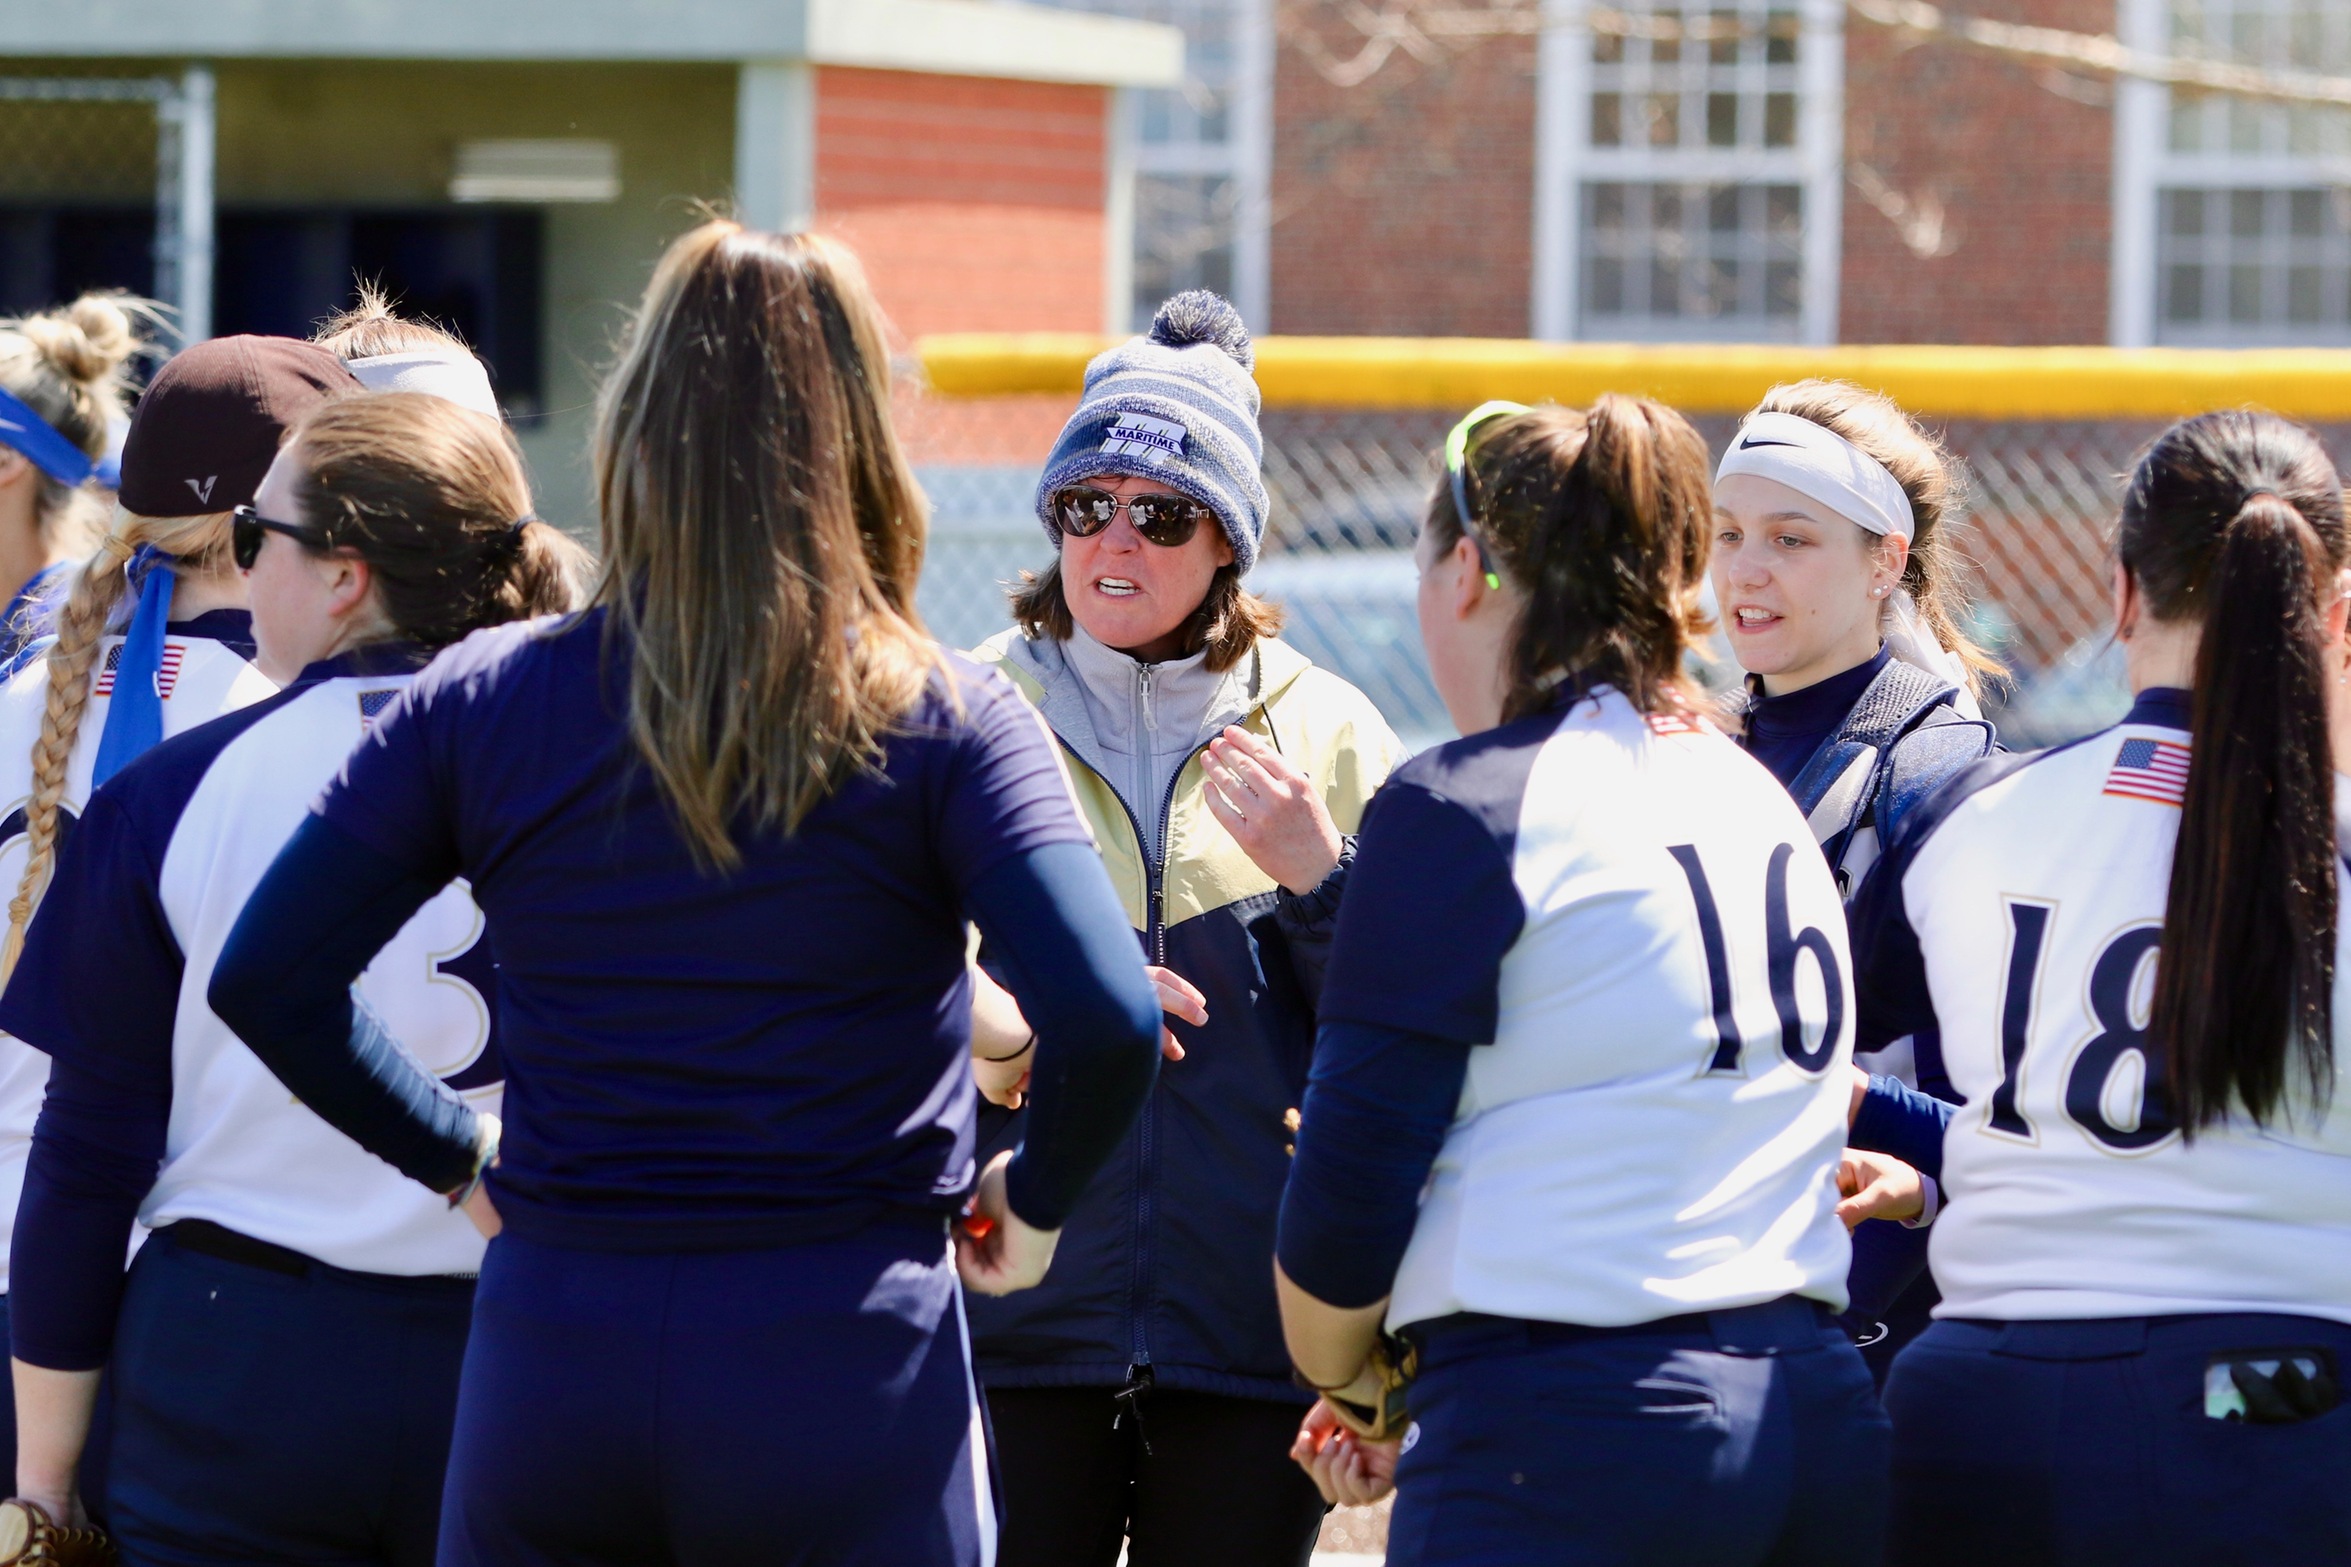 Softball: Bucs Swept by Bears in Conference Play